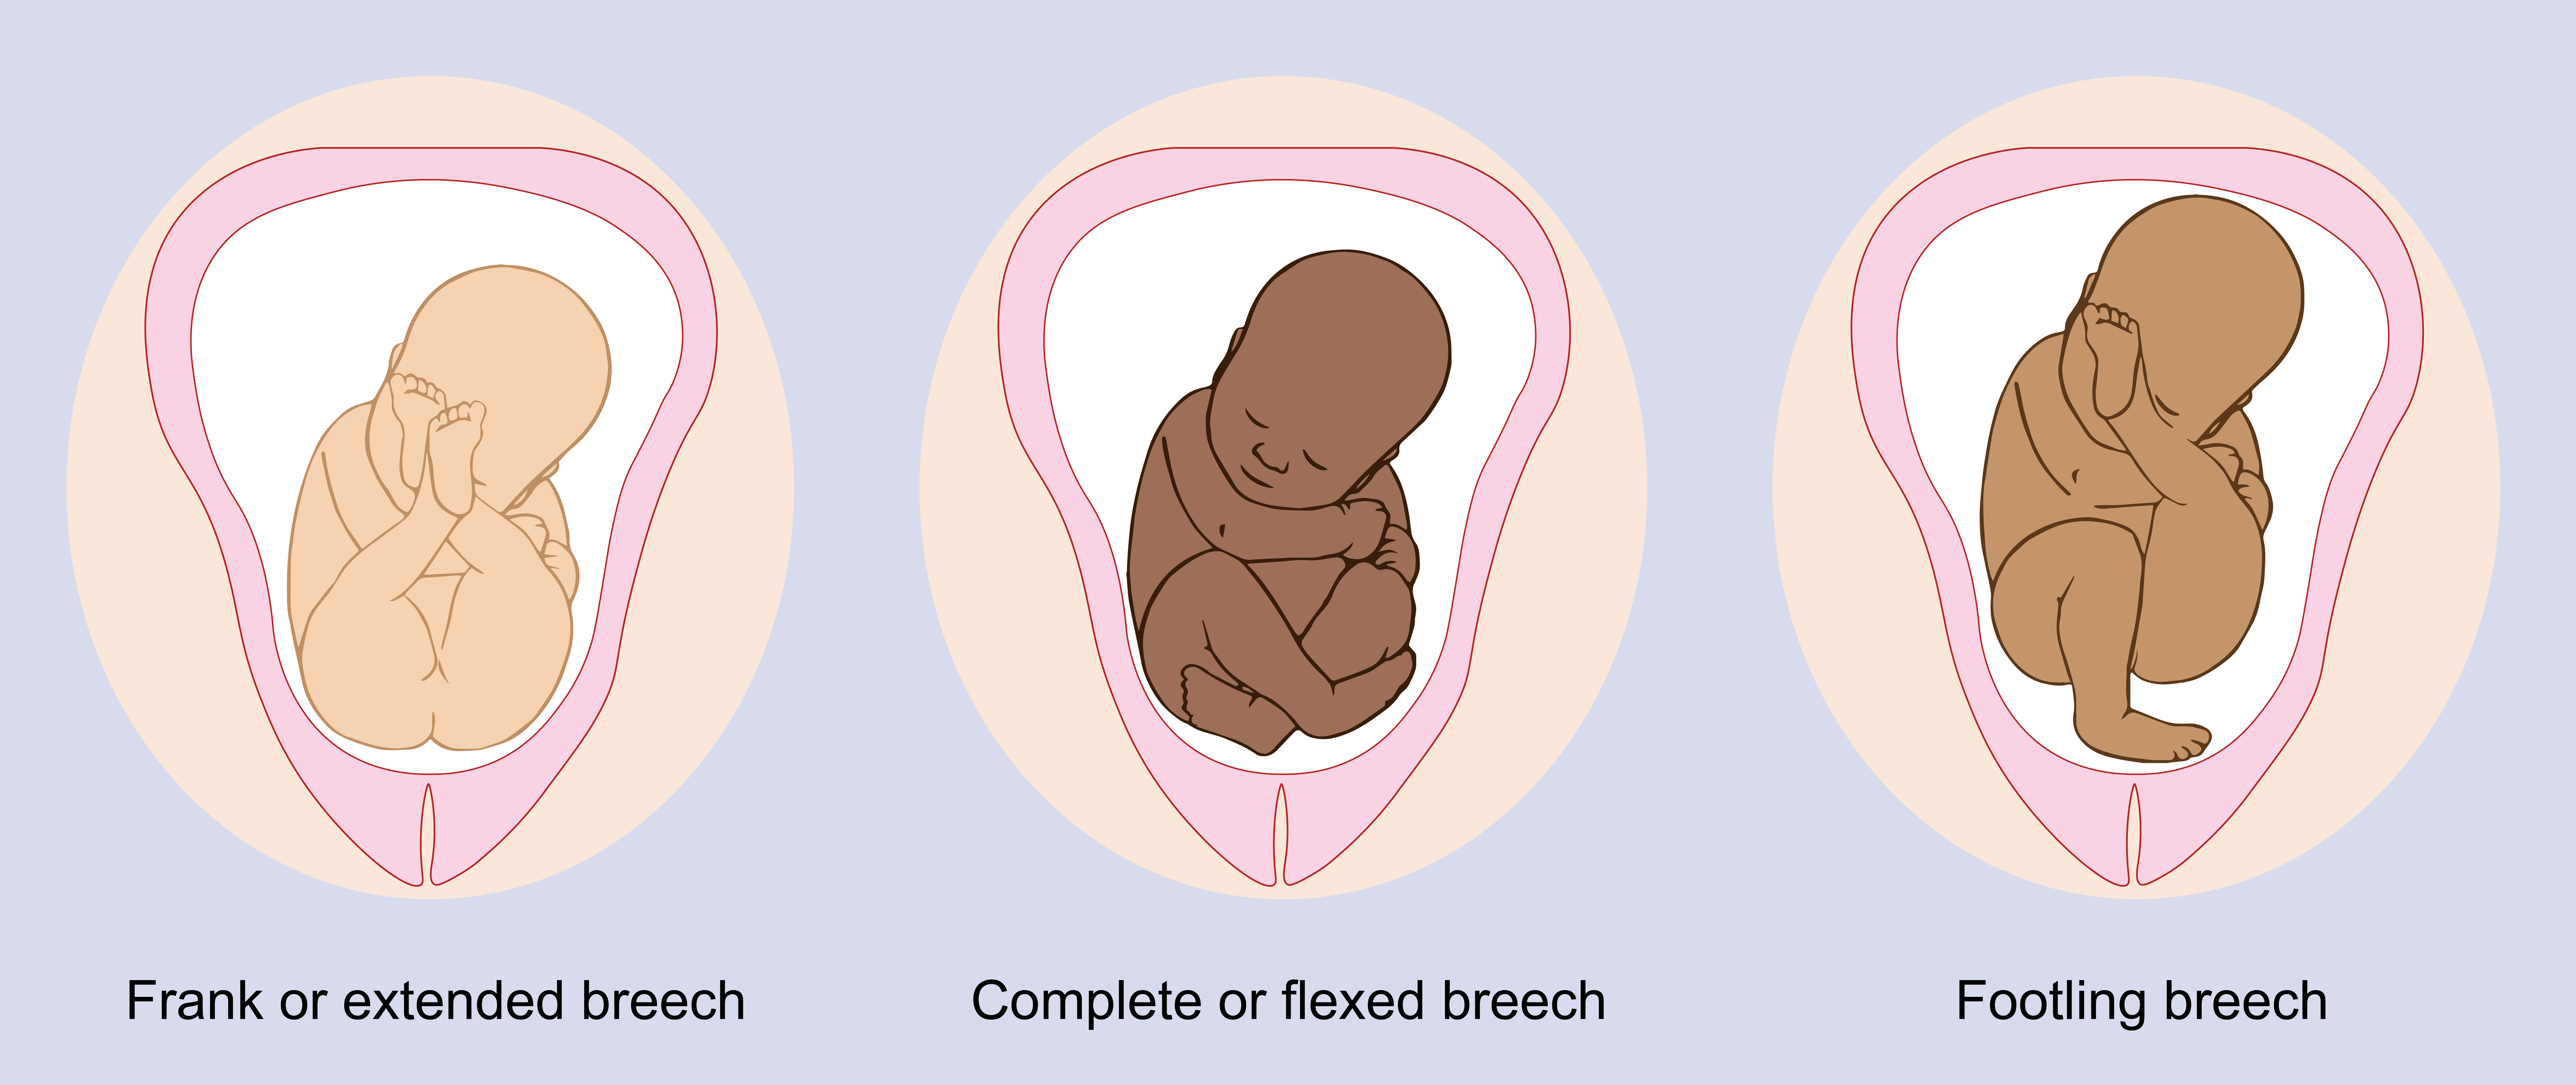 Illustration showing the different types of breech positions